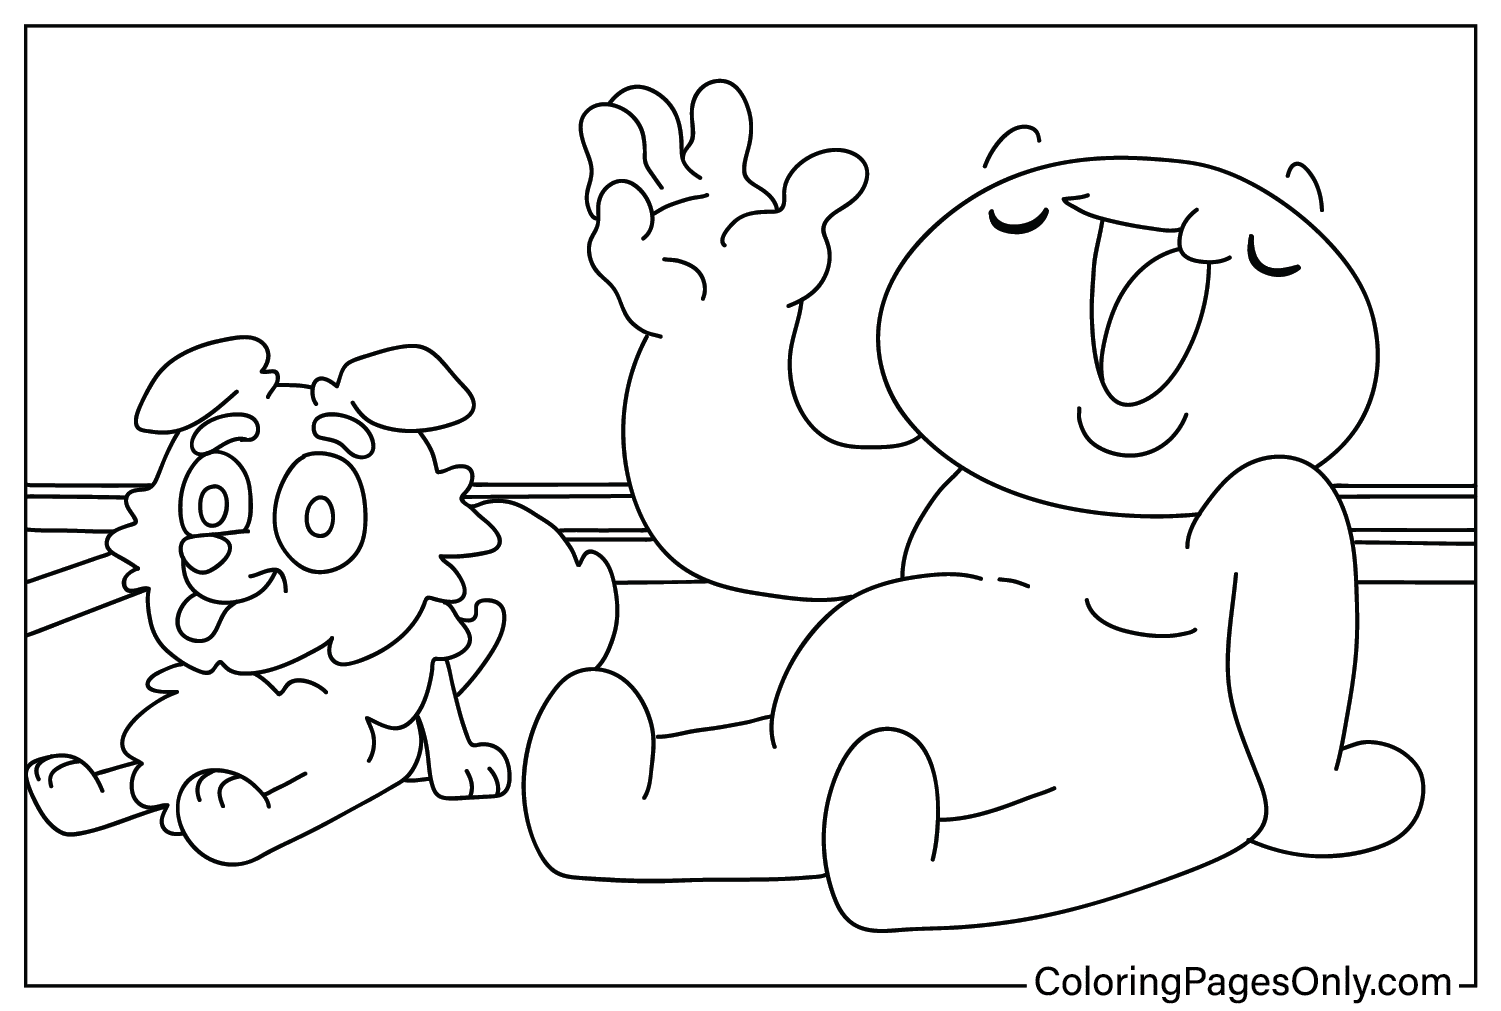 TheOdd1sOut Coloring Page from TheOdd1sOut